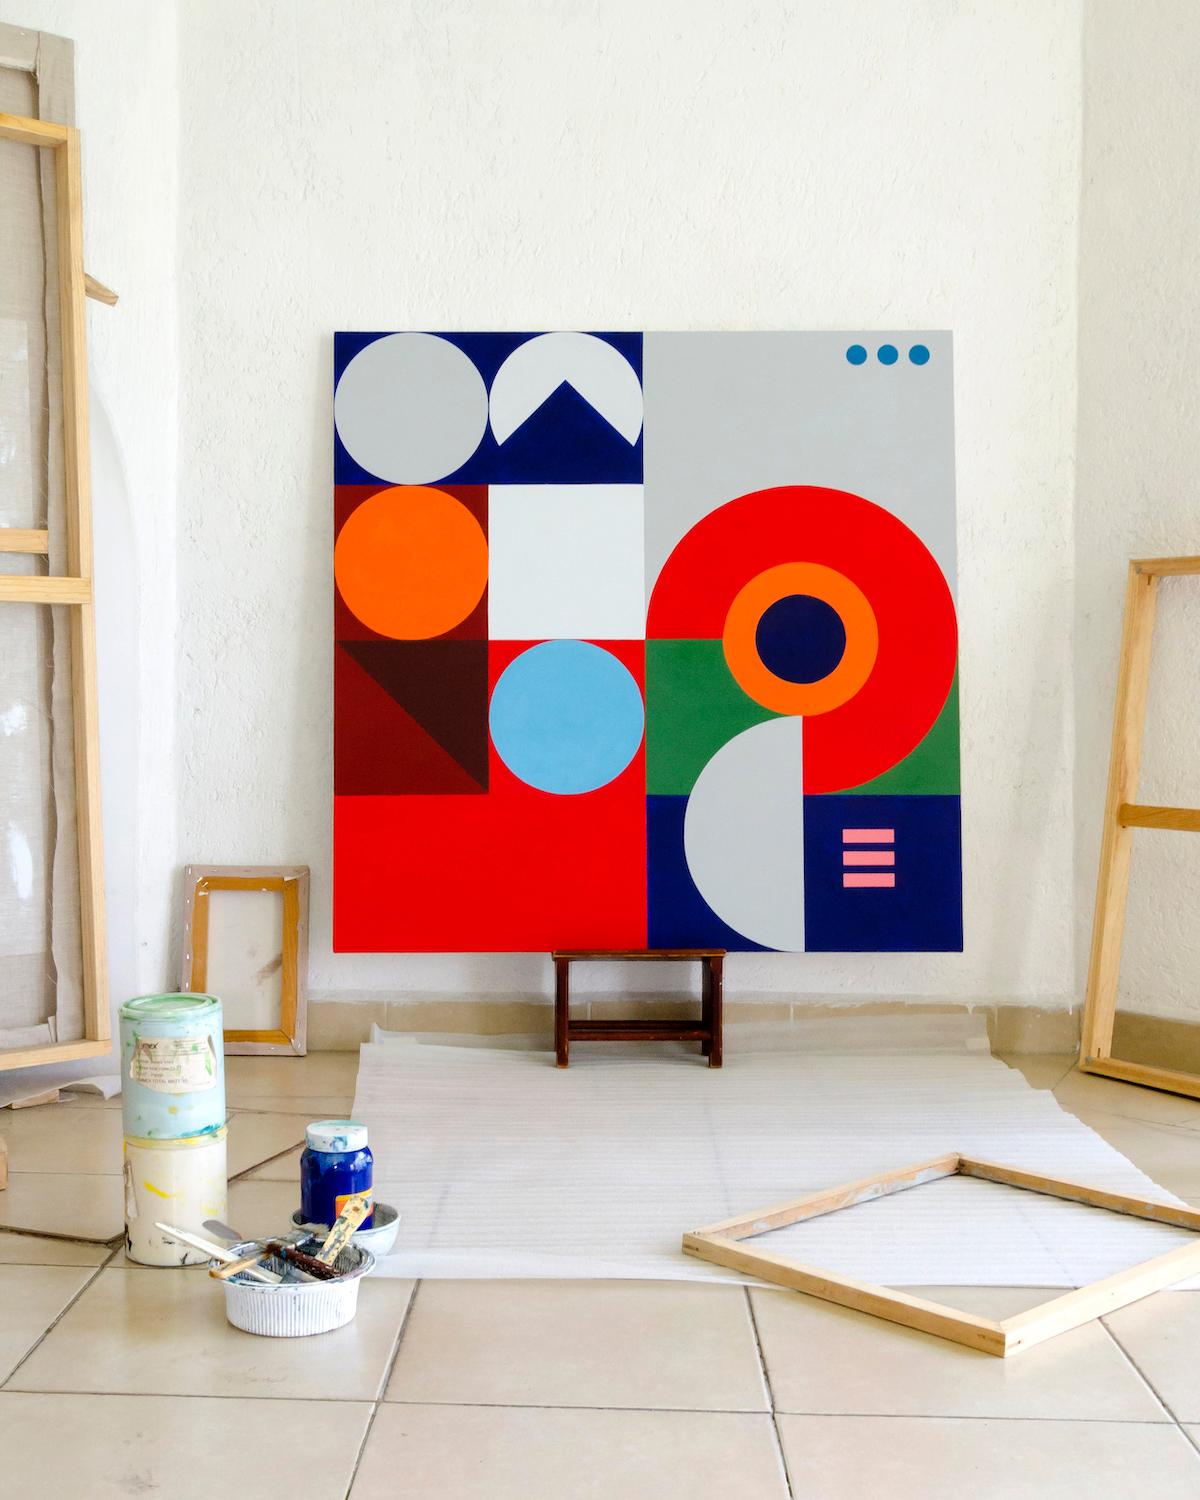 Contemporary Art, Abstract Painting
Acrylic on canvas
100x100cm
Signed and dated on the back 

About the artist

Alejandro Legorreta (Mexico, 1987)

I studied Hispanic Literature at Universidad Nacional Autonoma de Mexico (UNAM). My interest in the